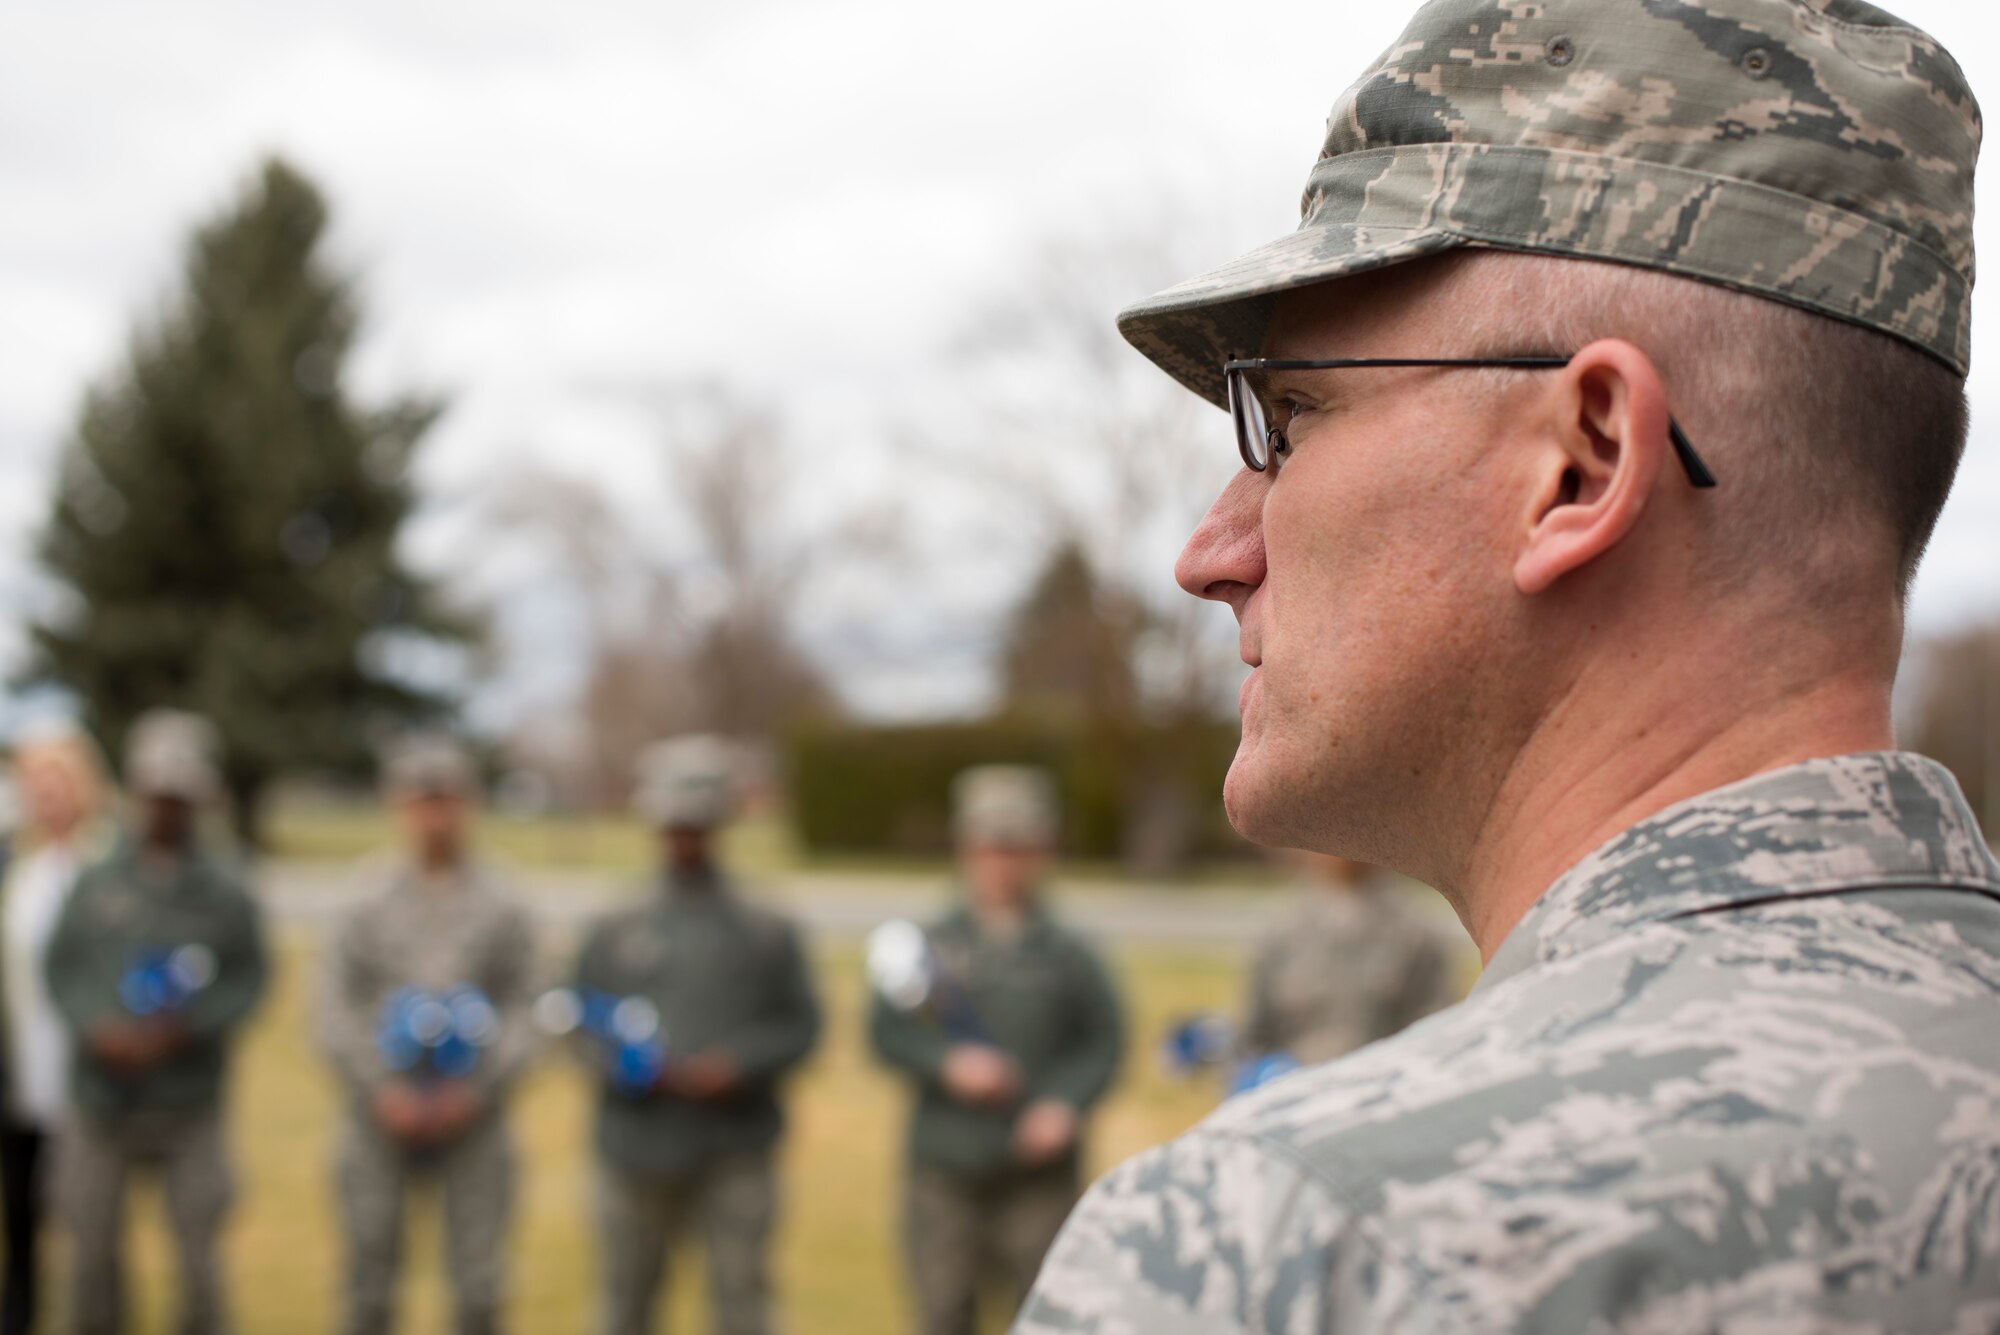 Col. Ryan Samuelson, 92nd Air Refueling Wing commander, speaks to Airmen during a base pinwheel ceremony in honor of Child Abuse Awareness Month at Fairchild Air Force Base, Washington, April 9, 2018. Airmen installed pinwheels at the base chapel to honor Child Abuse Awareness Month. (U.S. Air Force photo/Senior Airman Ryan Lackey)